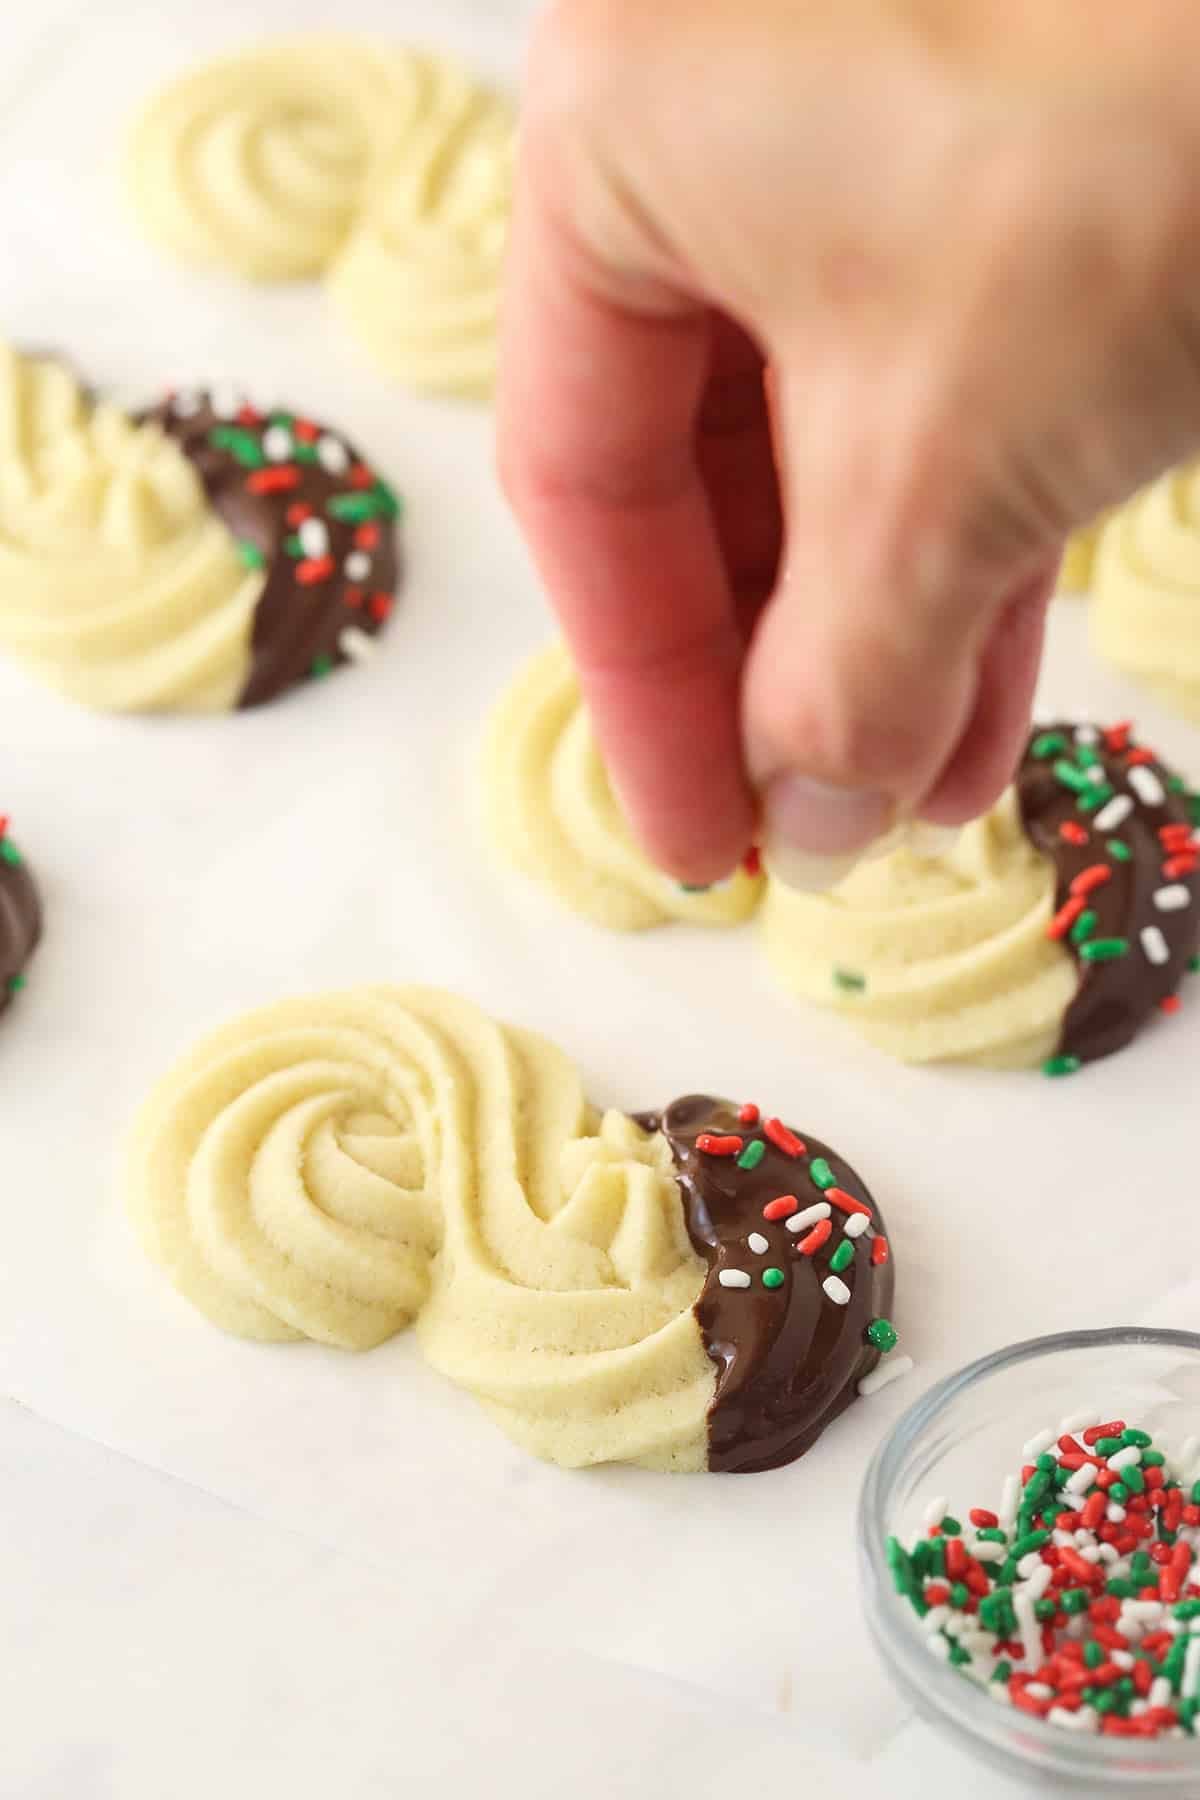 Adding sprinkles to the spritz cookies